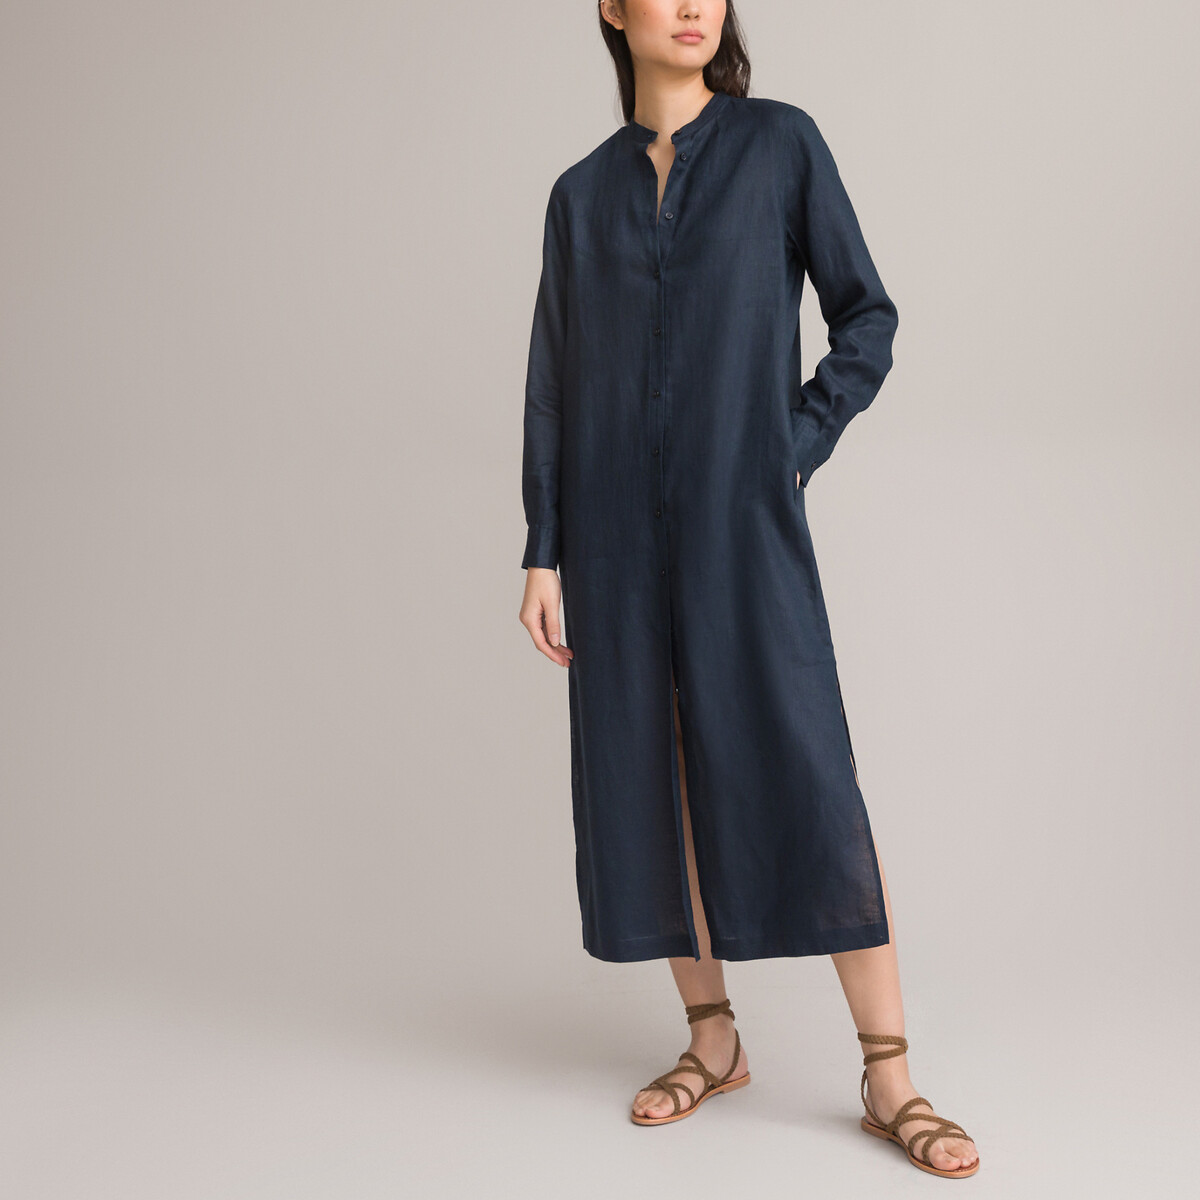 Explore the elegance of linen dresses for every occasion this summer. From sophisticated midi dresses to casual shirt styles, find the perfect blend of comfort & style in our curated selection. Linen Dress Designer | Linen Dress Pattern | Linen Dress Outfit | Linen Dress Elegant | Linen Dress Beach | Linen Dress Boho | Linen Dress With Sleeves | Linen Dress Styles | Linen Dress Outfits | Linen Dress Ideas | Linen Dress Patterns | Linen Dresses Europe | Linen Dresses Elegant | Linen Dress A Line